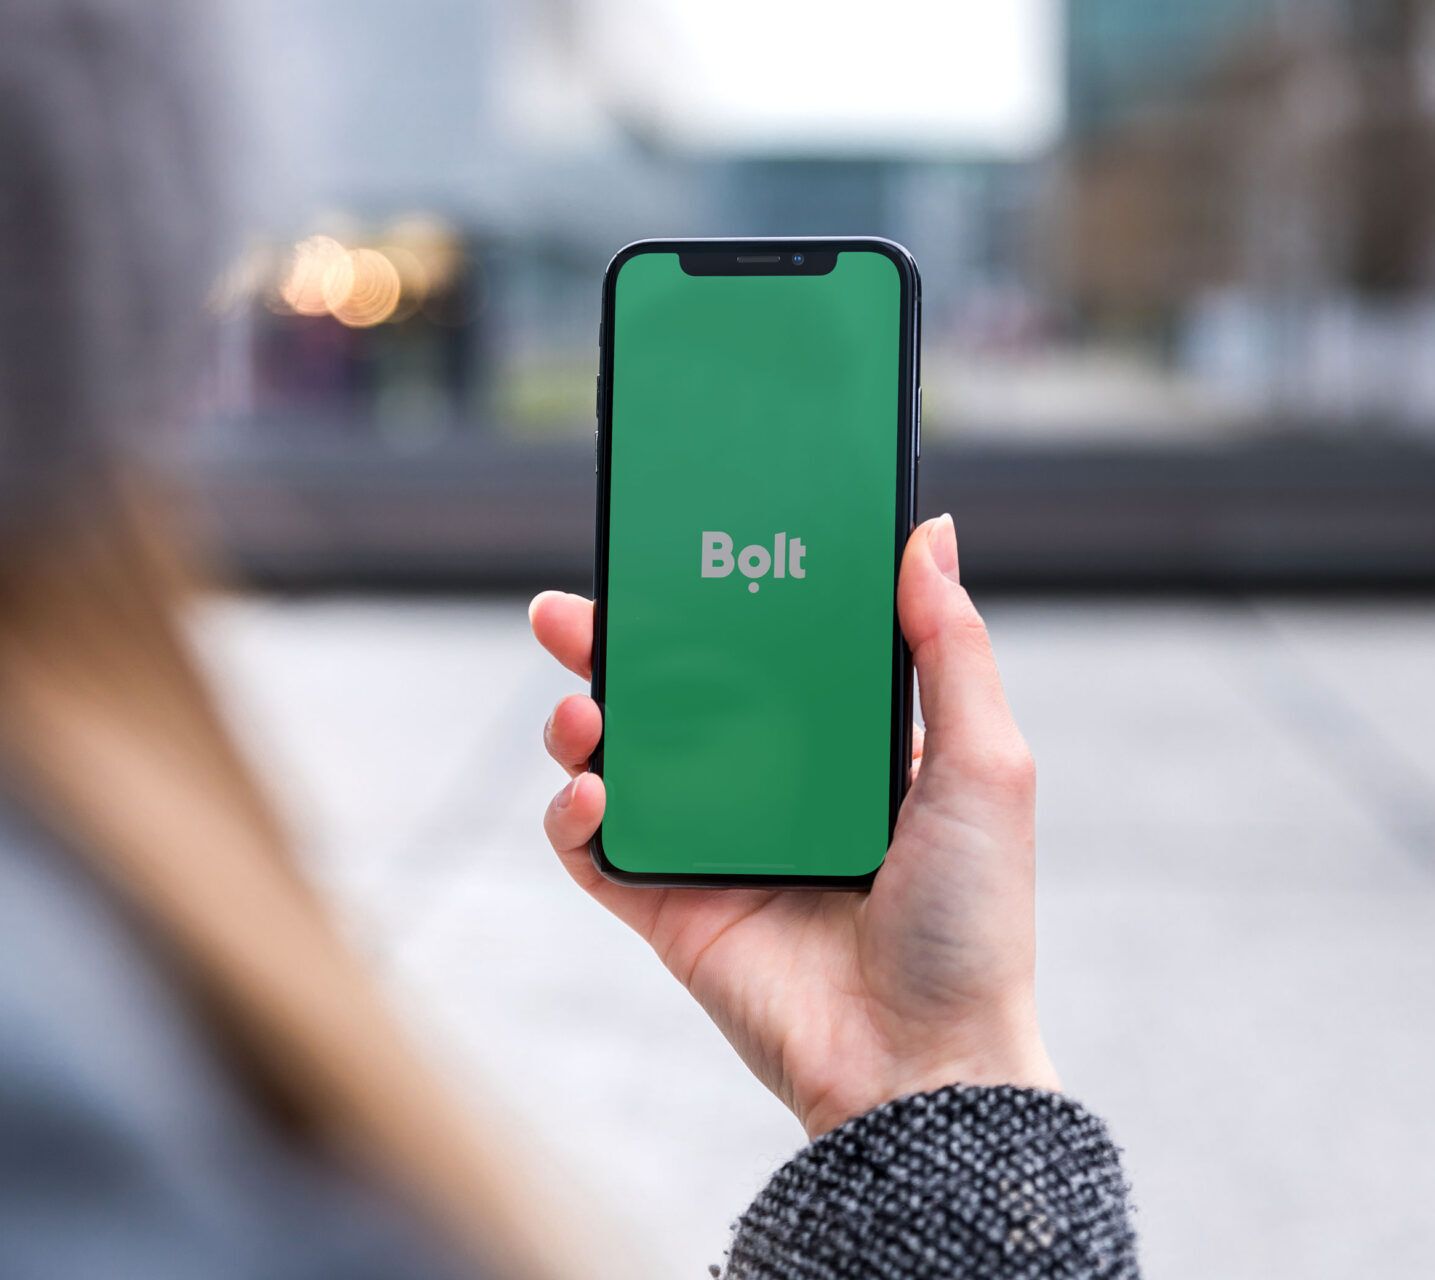 Bolt rolls out a cheaper ride-hailing service in South Africa.